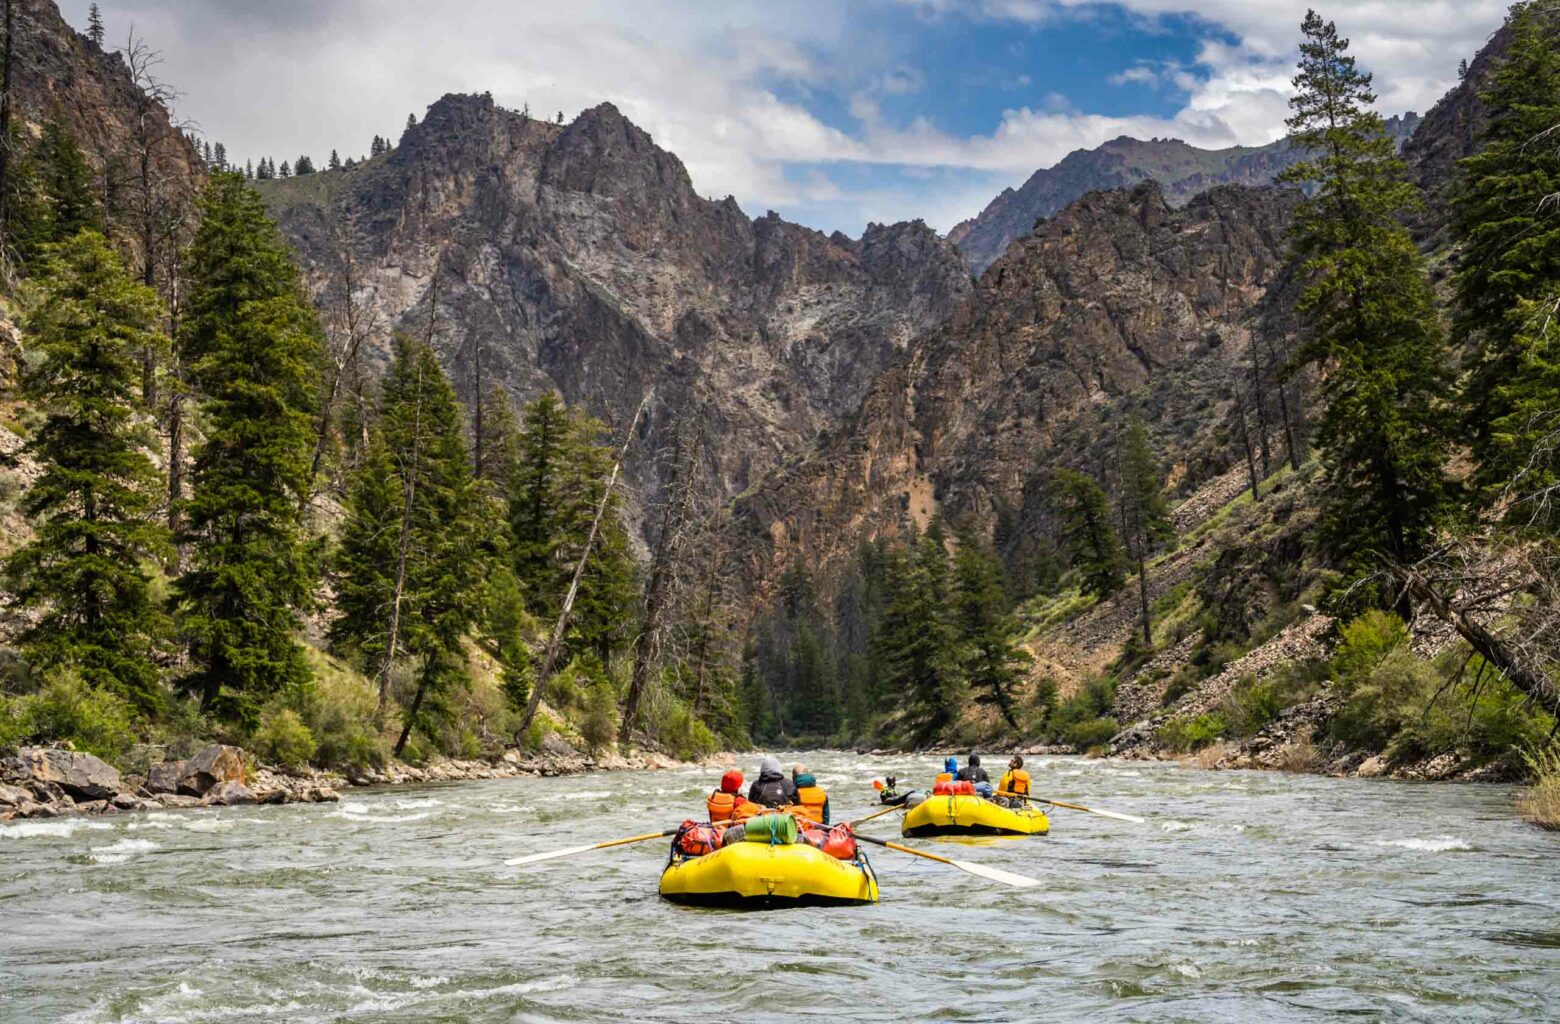 Two groups of people white water rafting in the Middle Fork of the Salmon River.